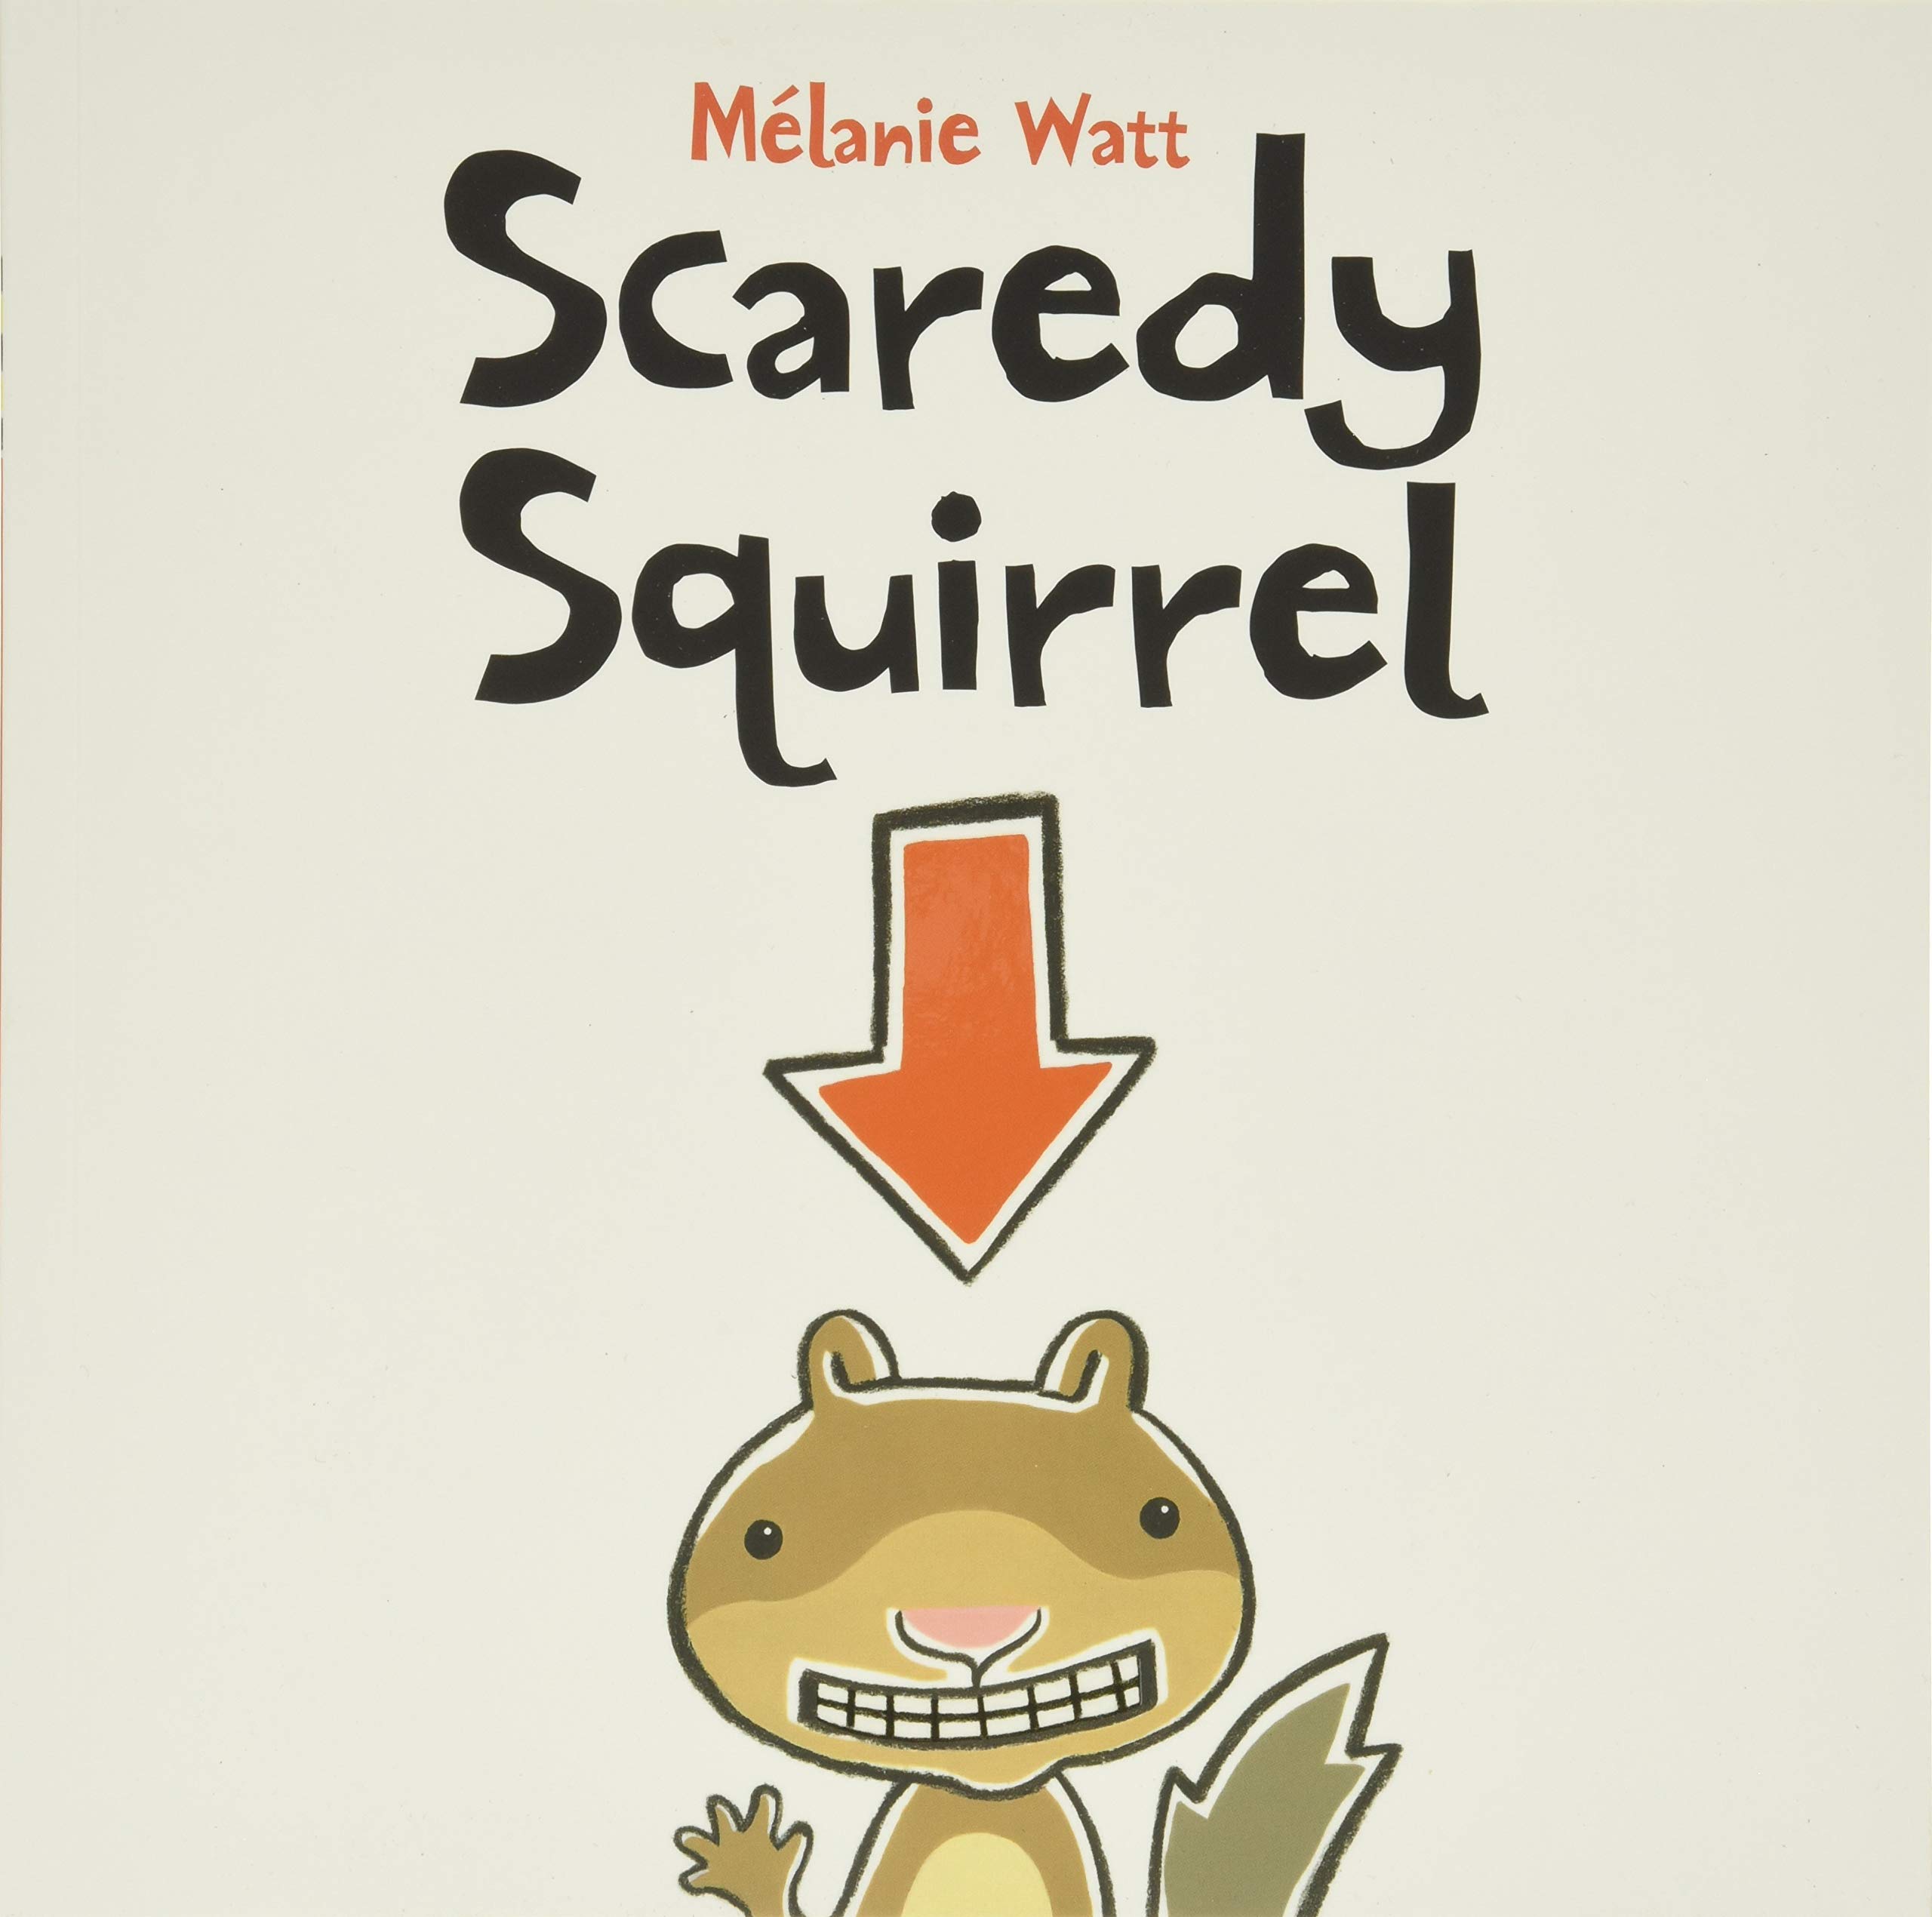 speech and language teaching concepts for Scaredy Squirrel in speech therapy​ ​